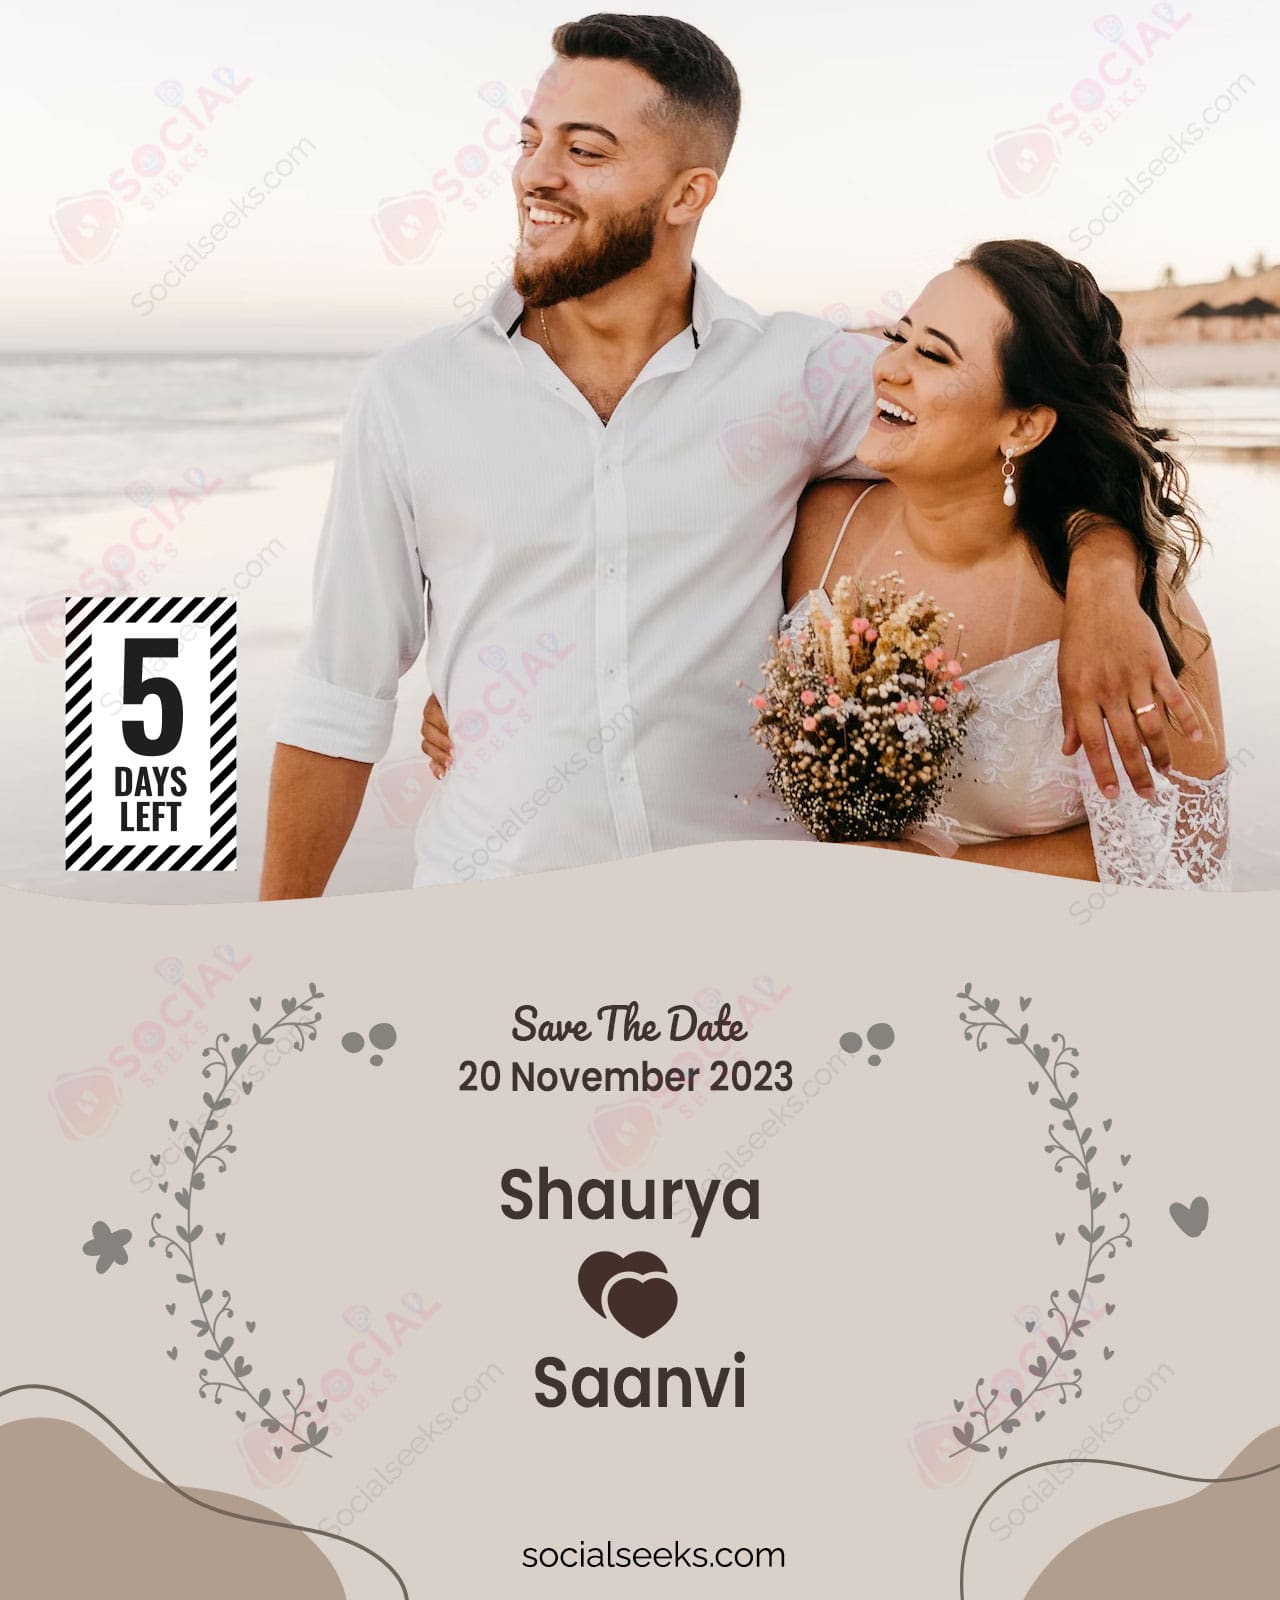 5 Five Days to go wedding countdown photo frame with couple name